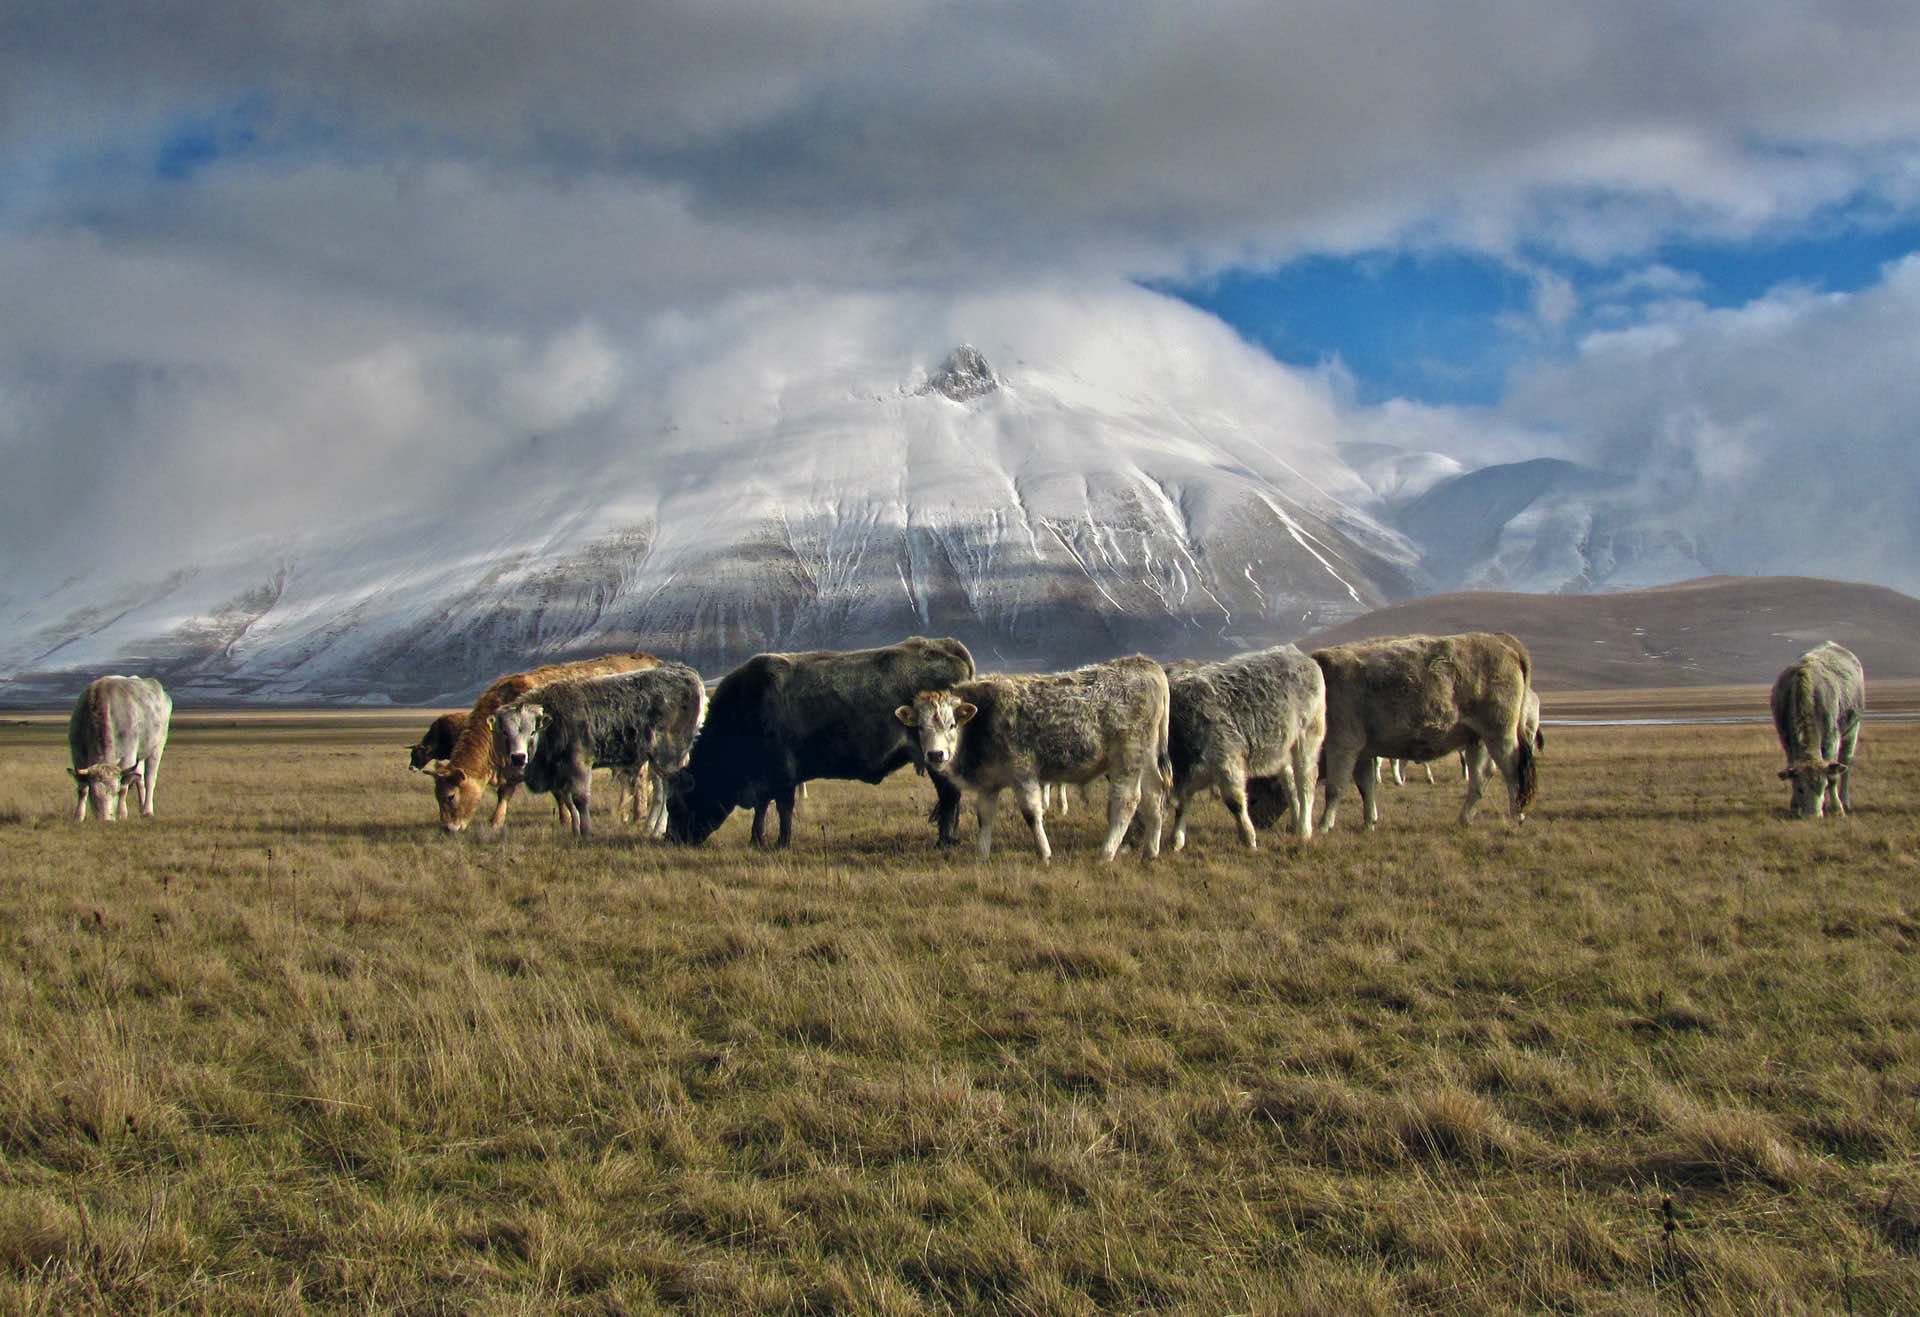 Land-use to solve climate change: a focus on livestock